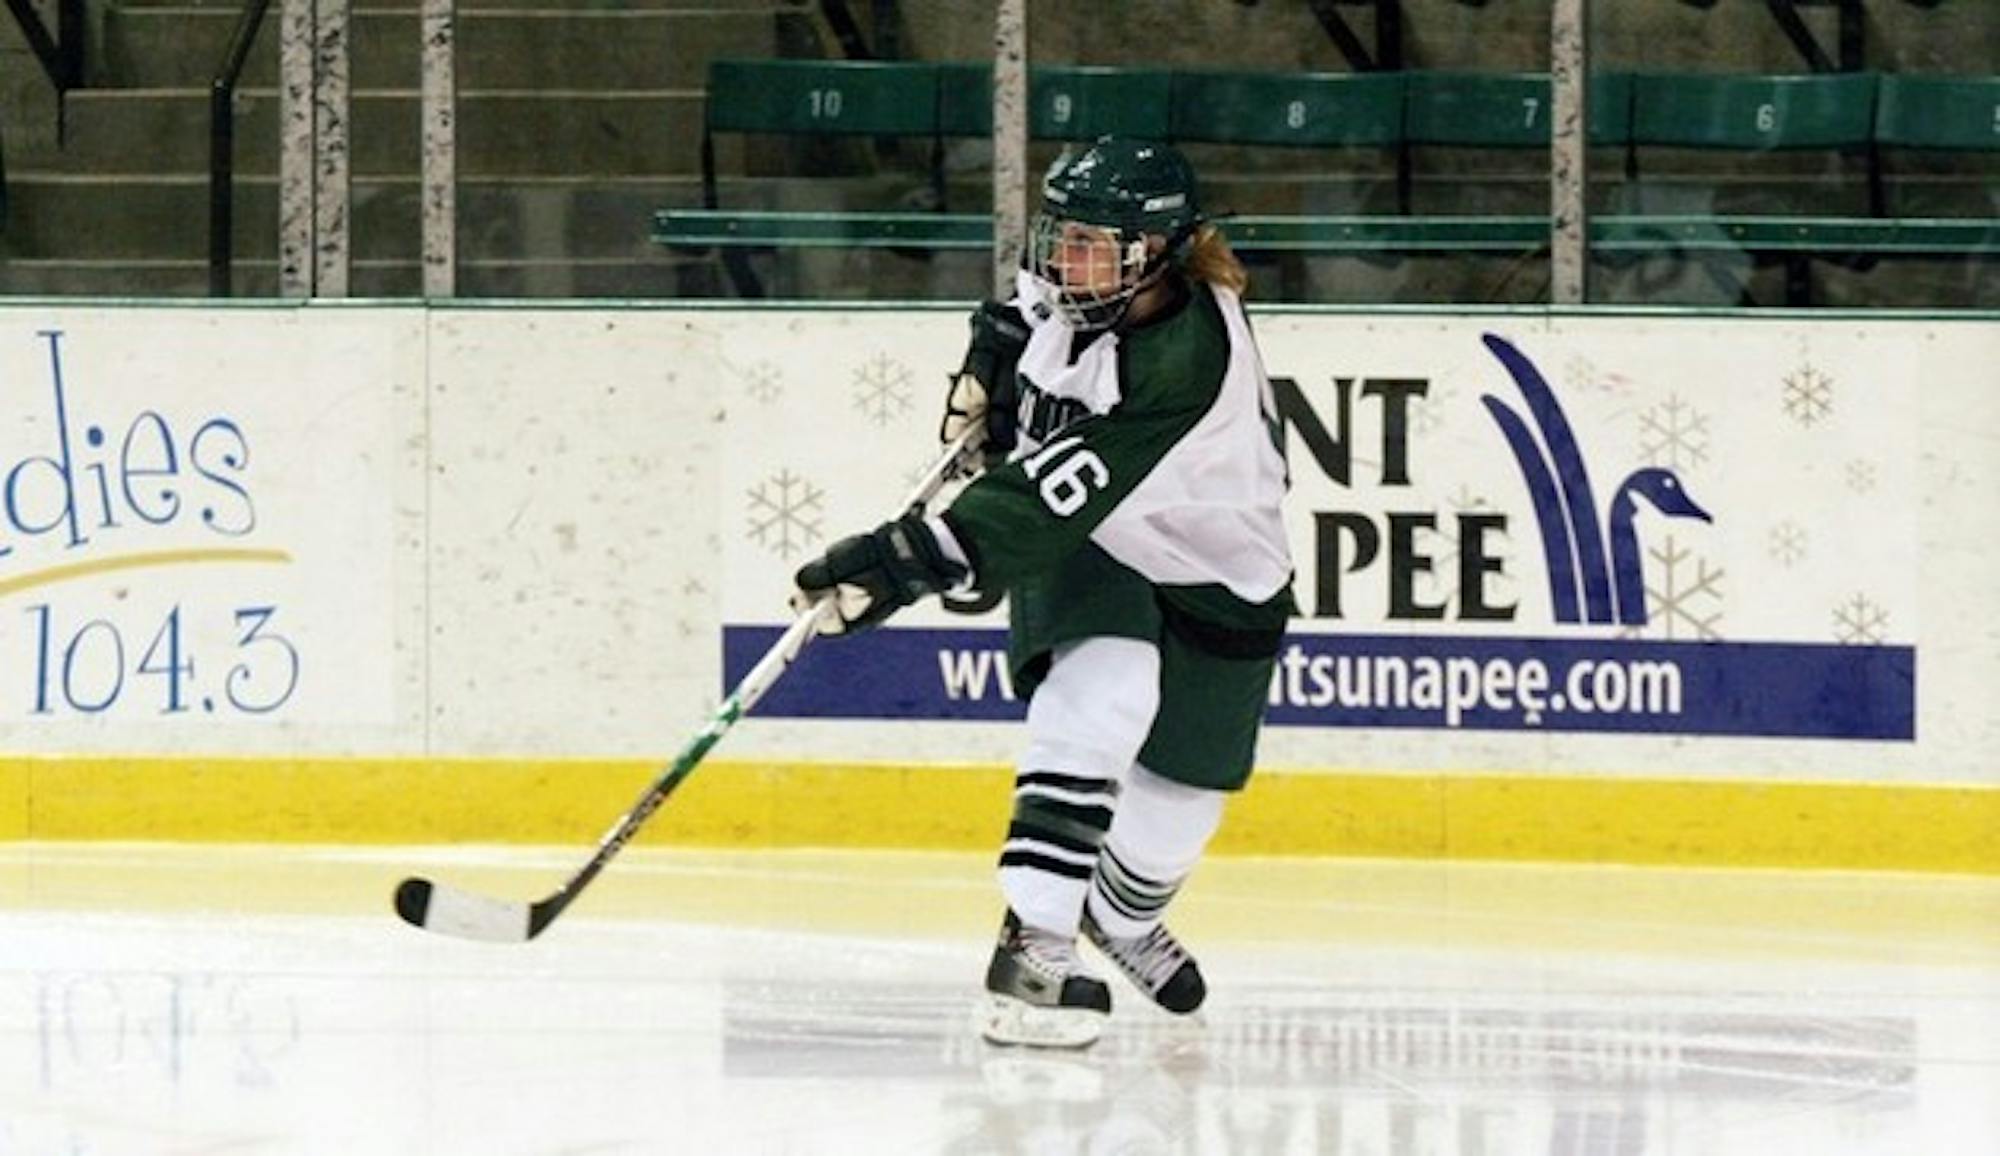 Shannon Bowman '09 and the Big Green will host Cornell and Colgate.